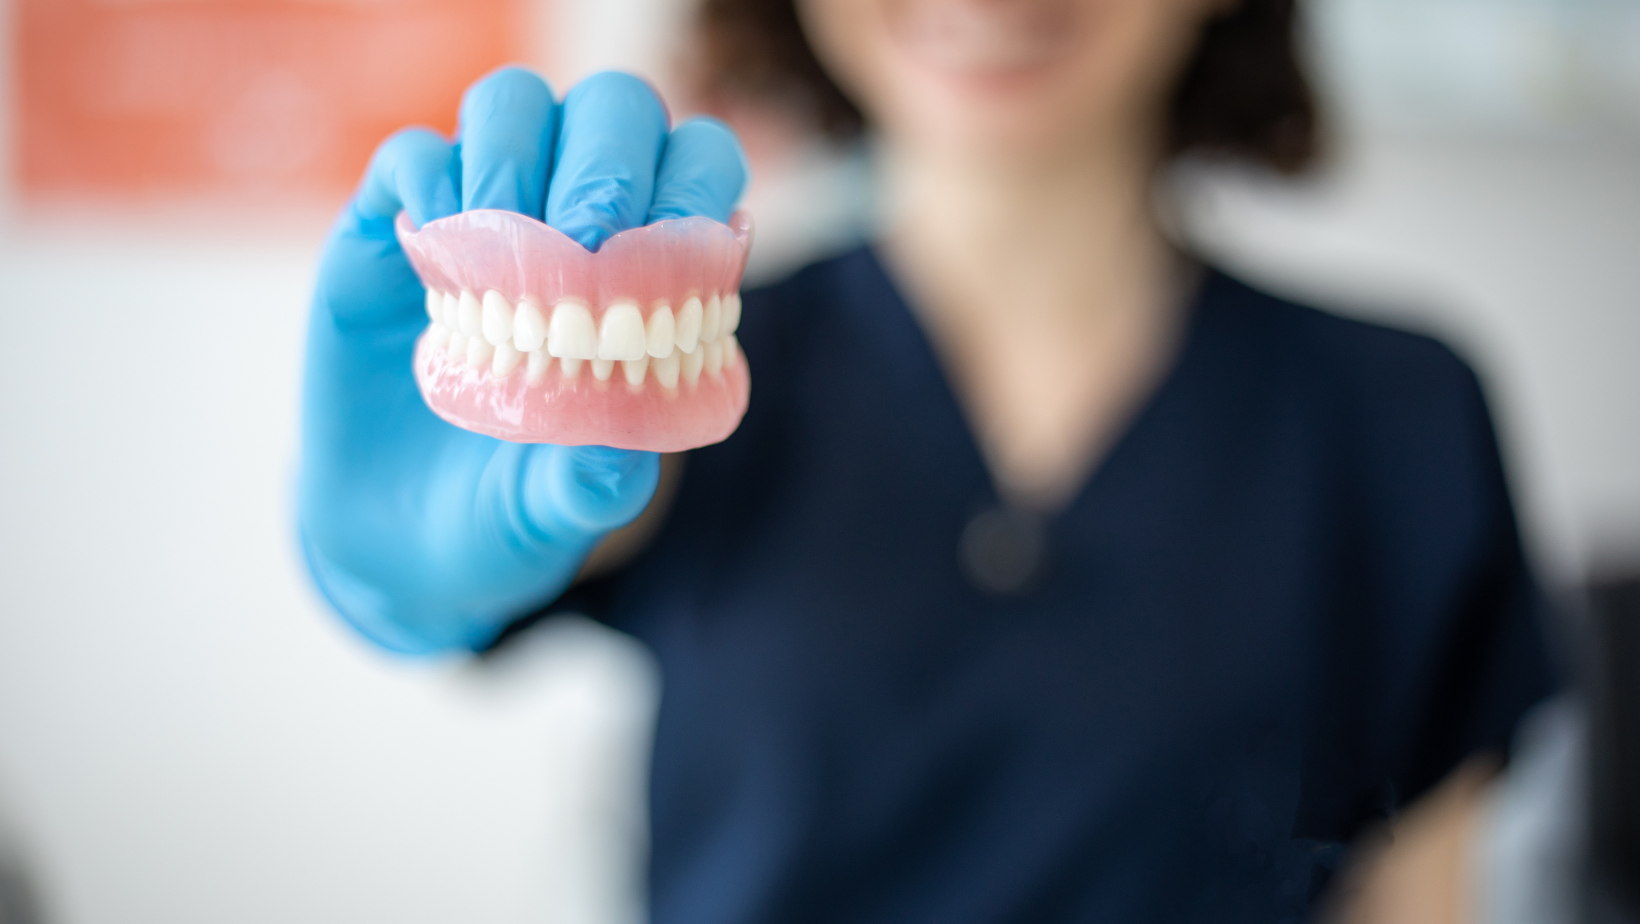 Fixed denture vs removable or snap-in denture, which is right for you?